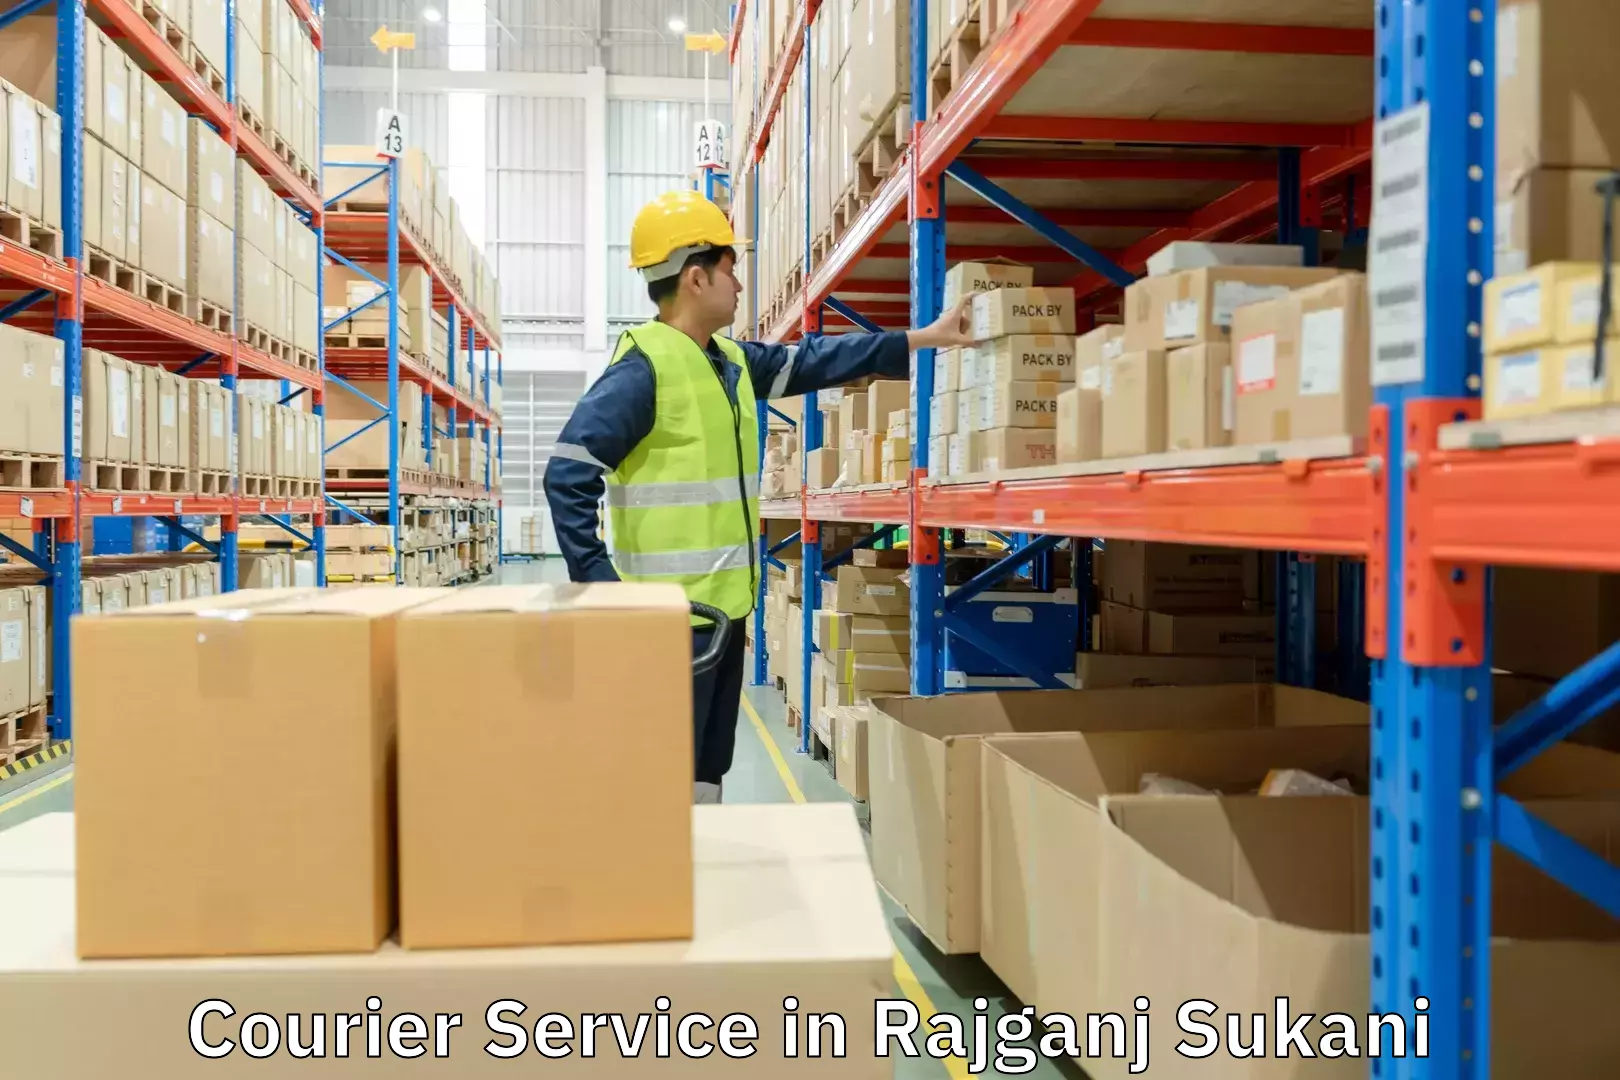 High-speed delivery in Rajganj Sukani